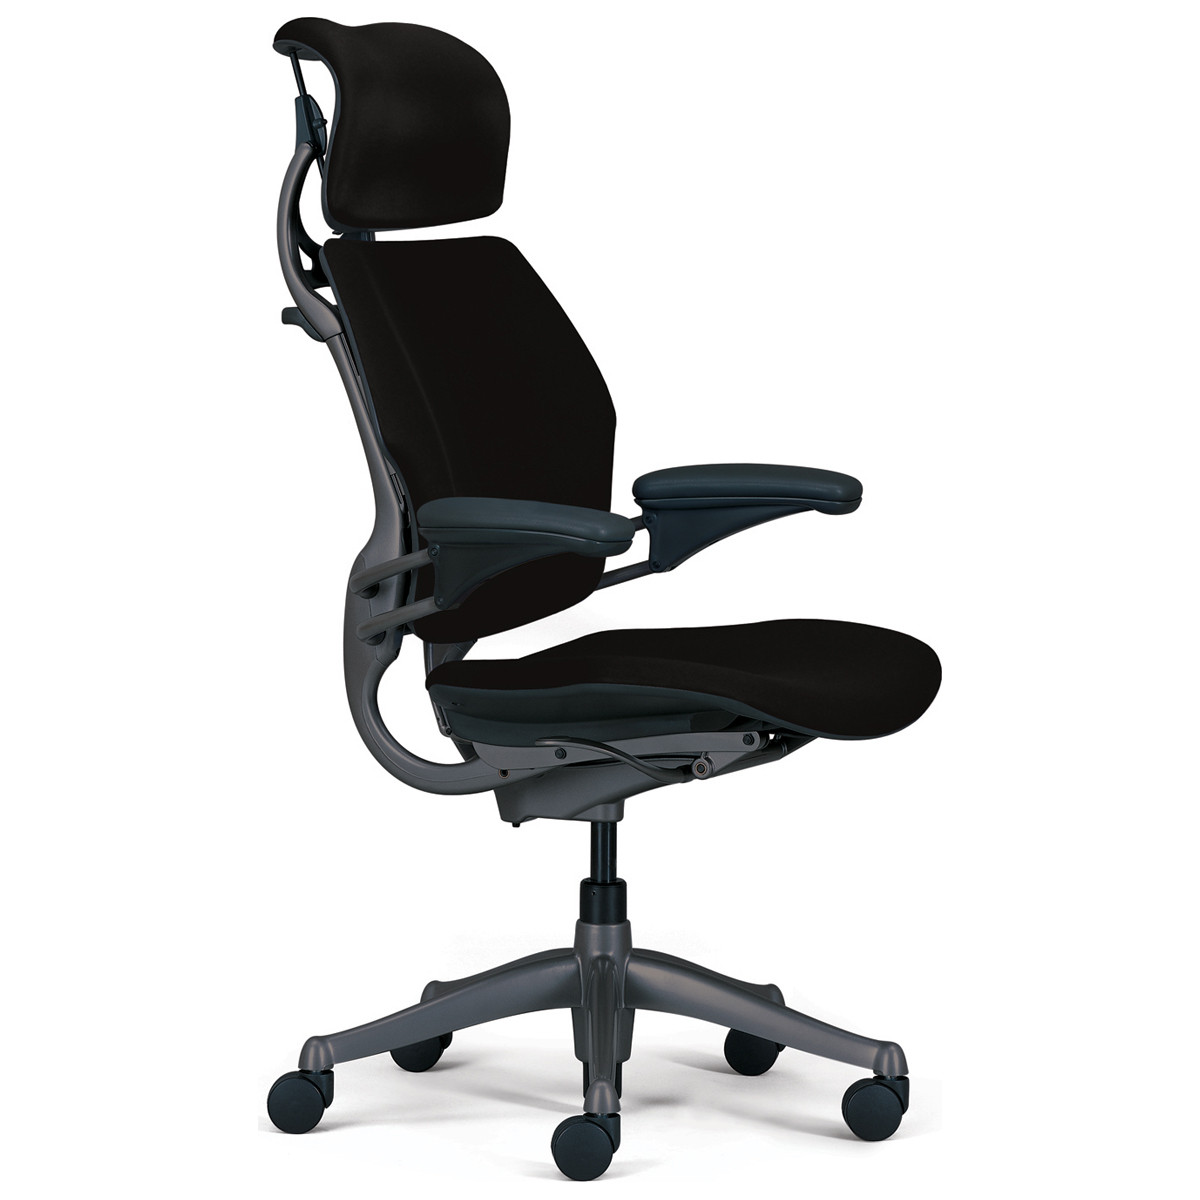 Humanscale Freedom Chair: Foam Seat Cushion; Black Color; Wave